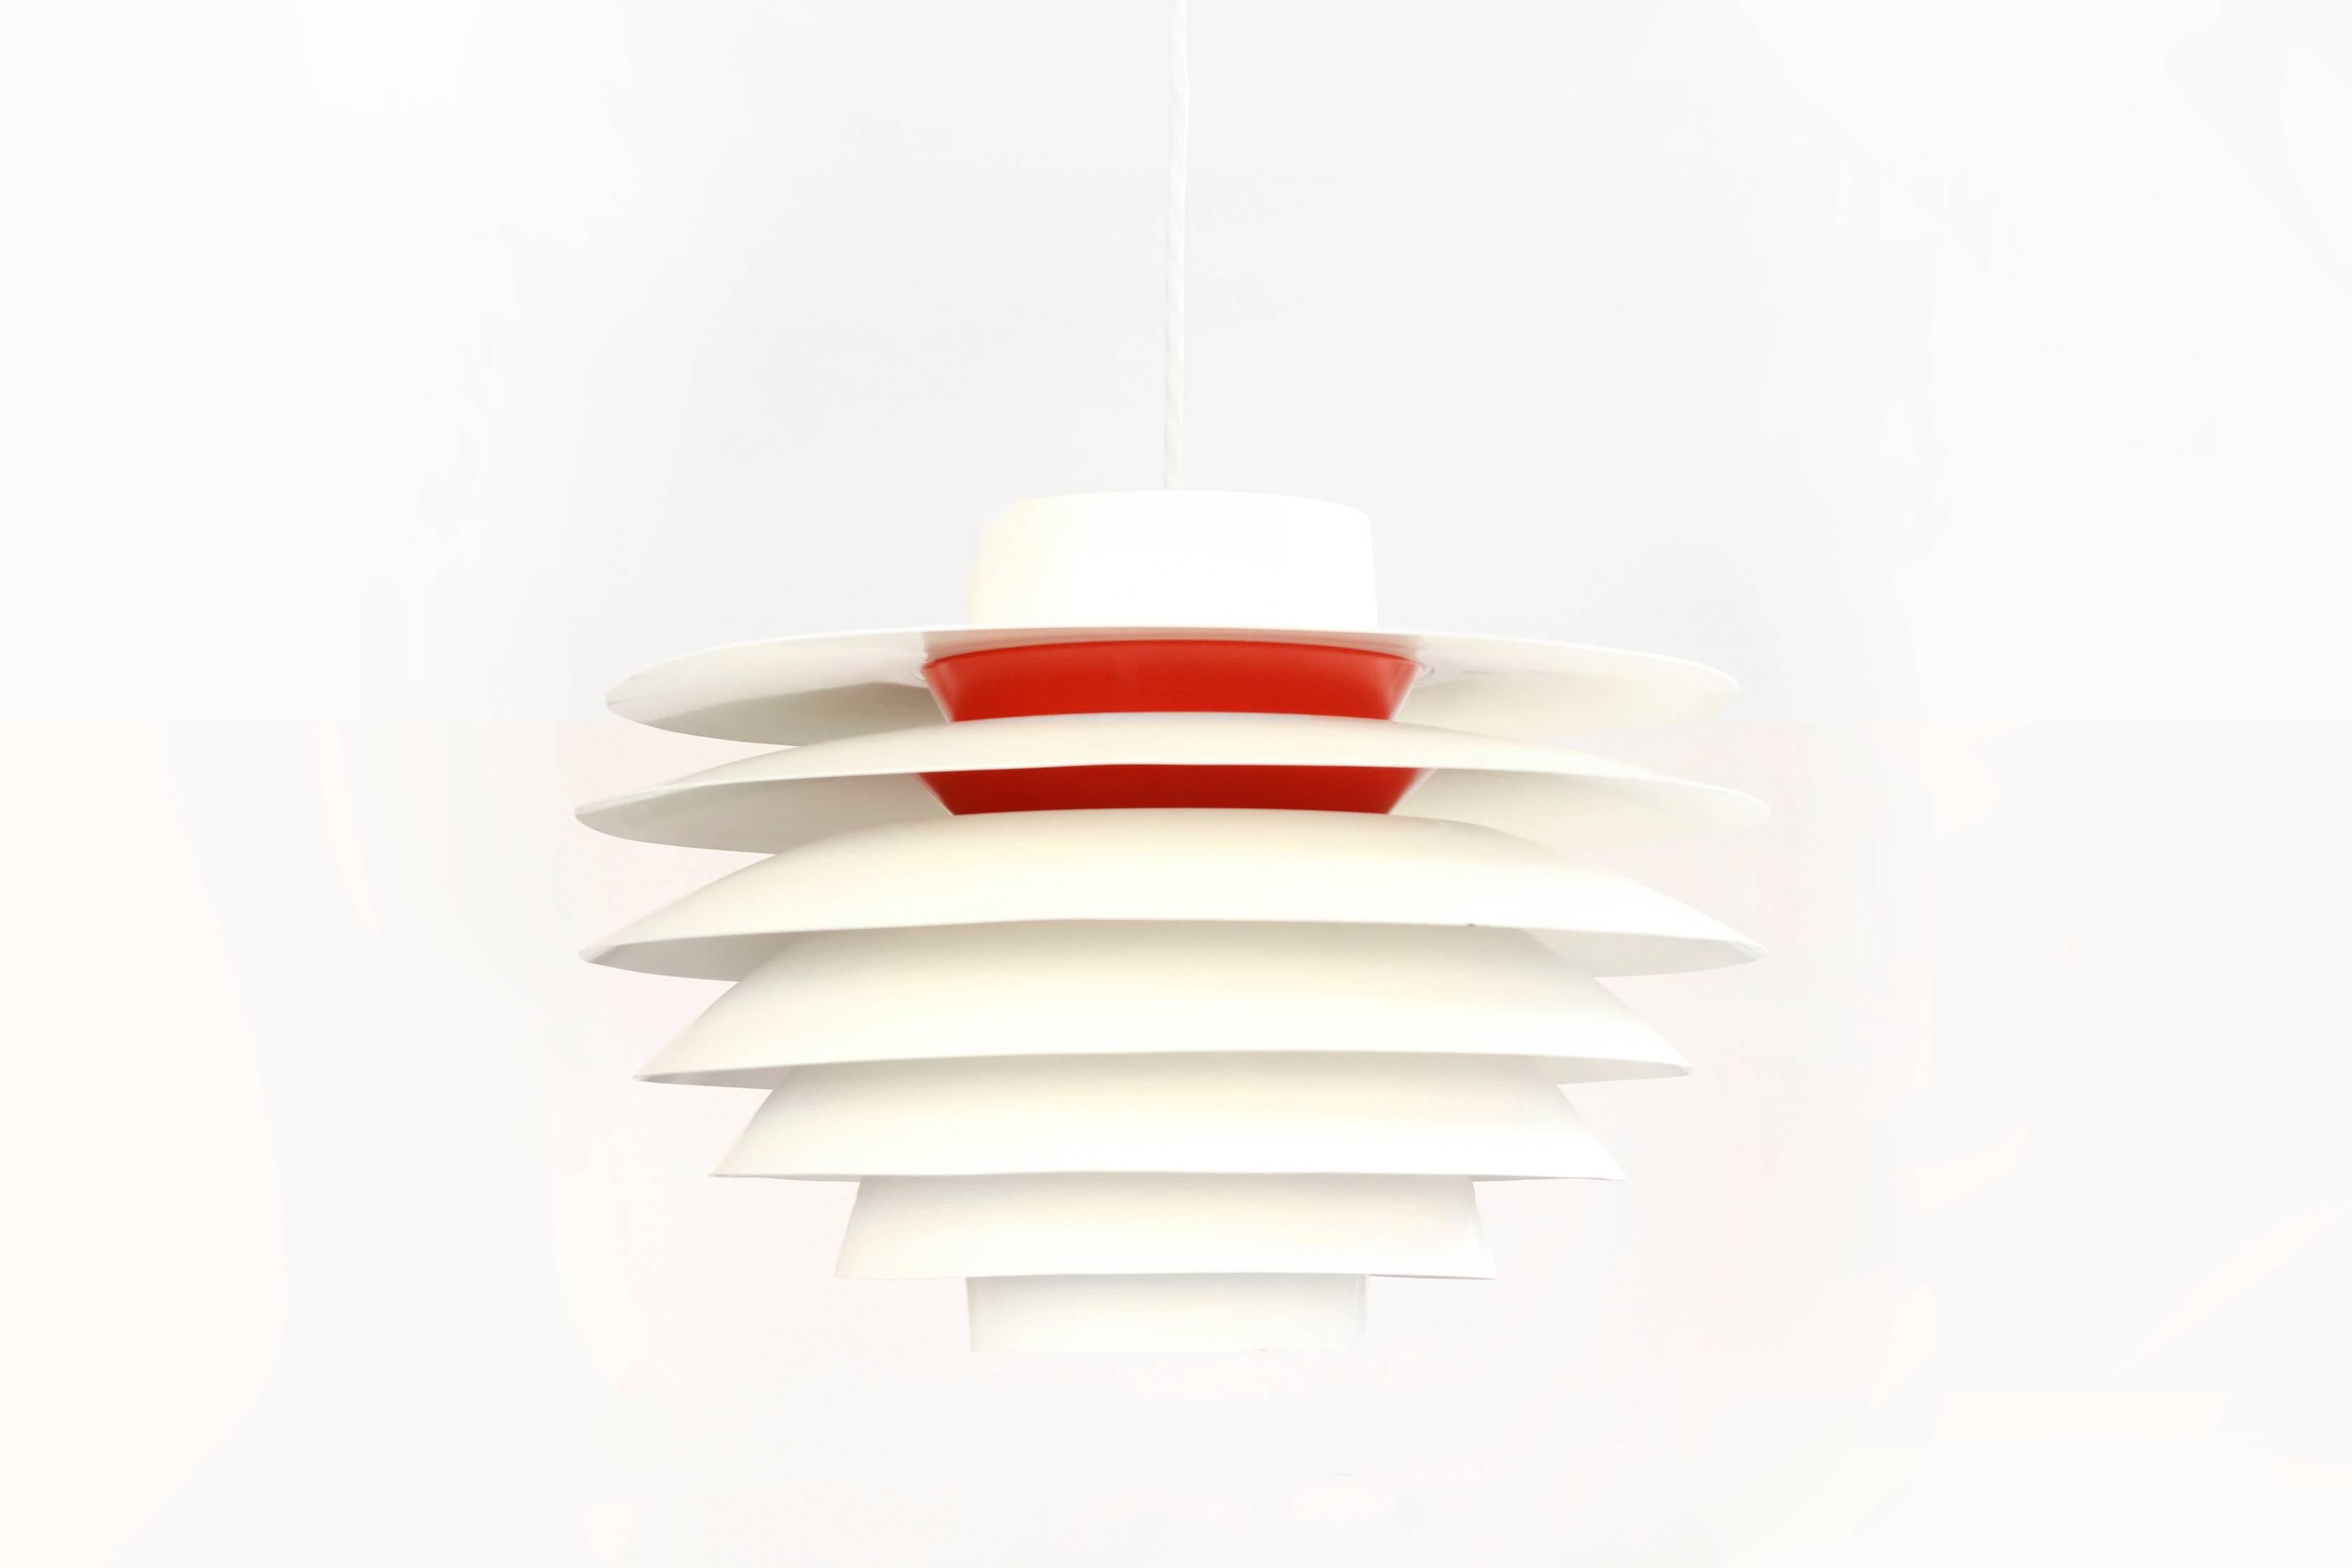 This Verona pendant lamp was designed by S. Middelboe for Nordisk Solar Compagni in Denmark in 1962.
It is made from aluminium and features a orange /red lacquered interior.
The model name of this lamp is 